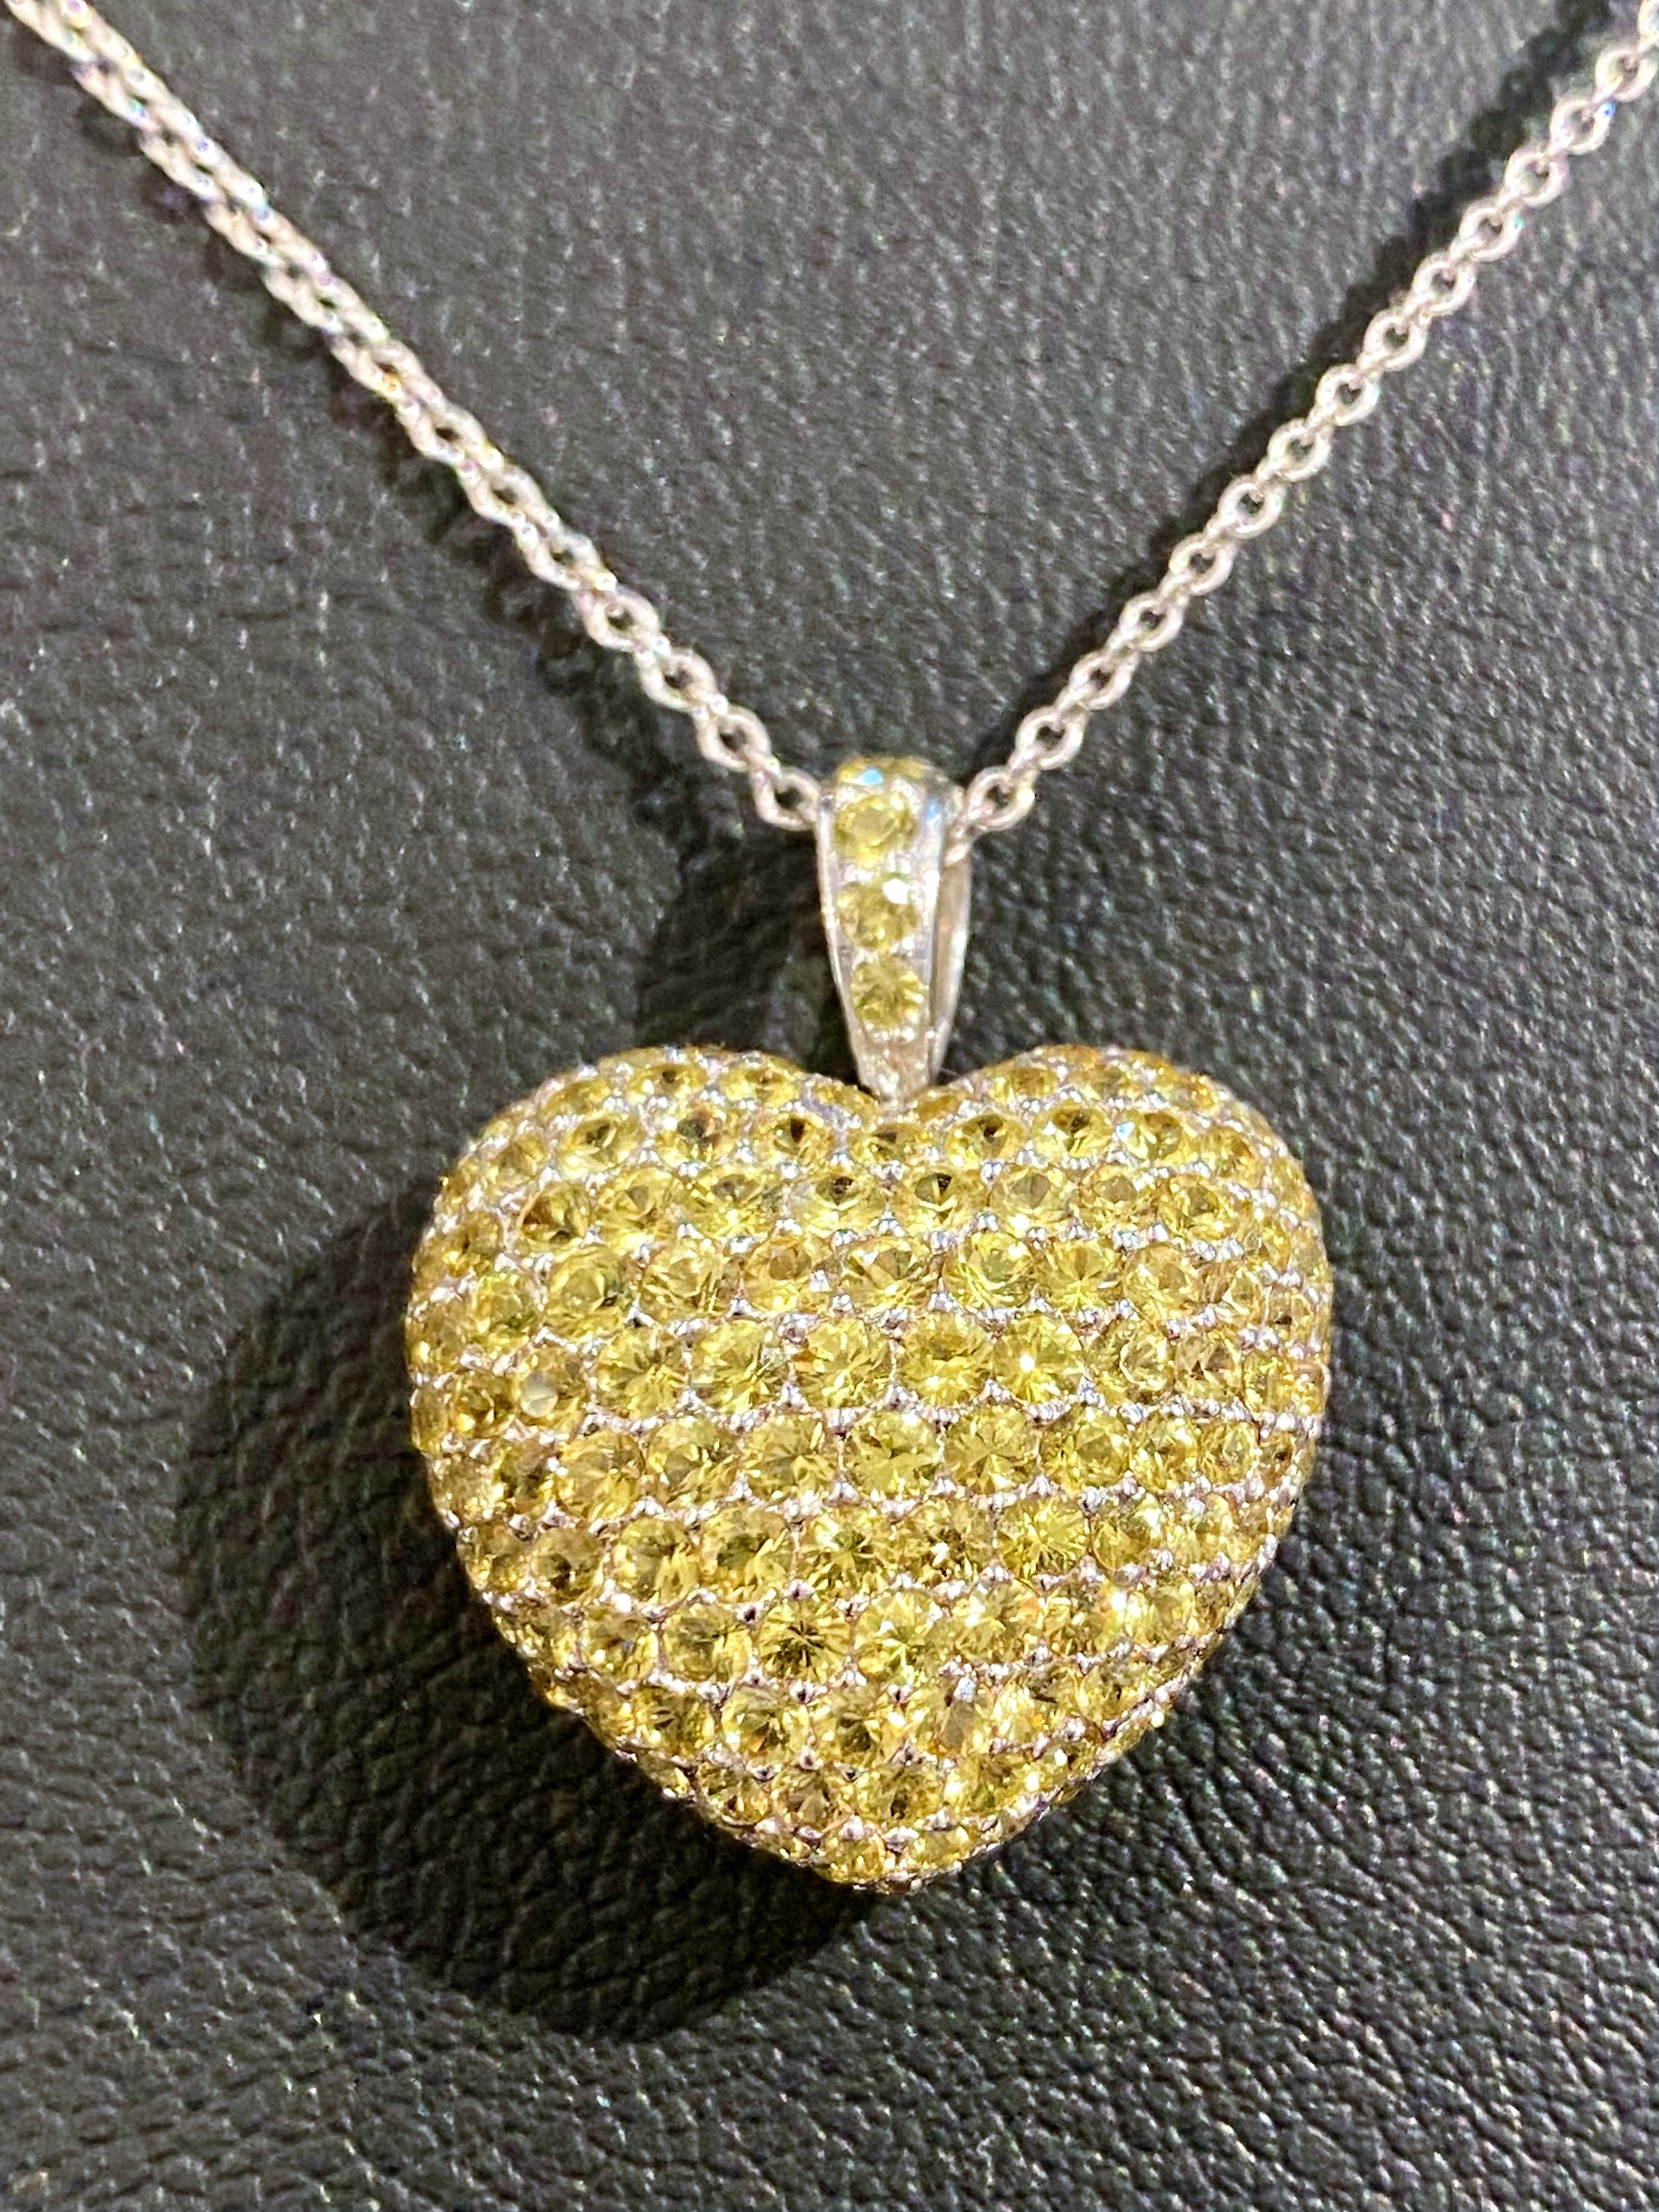 Bearfruit Jewelry Puffed Heart Pendant Necklace | CoolSprings Galleria